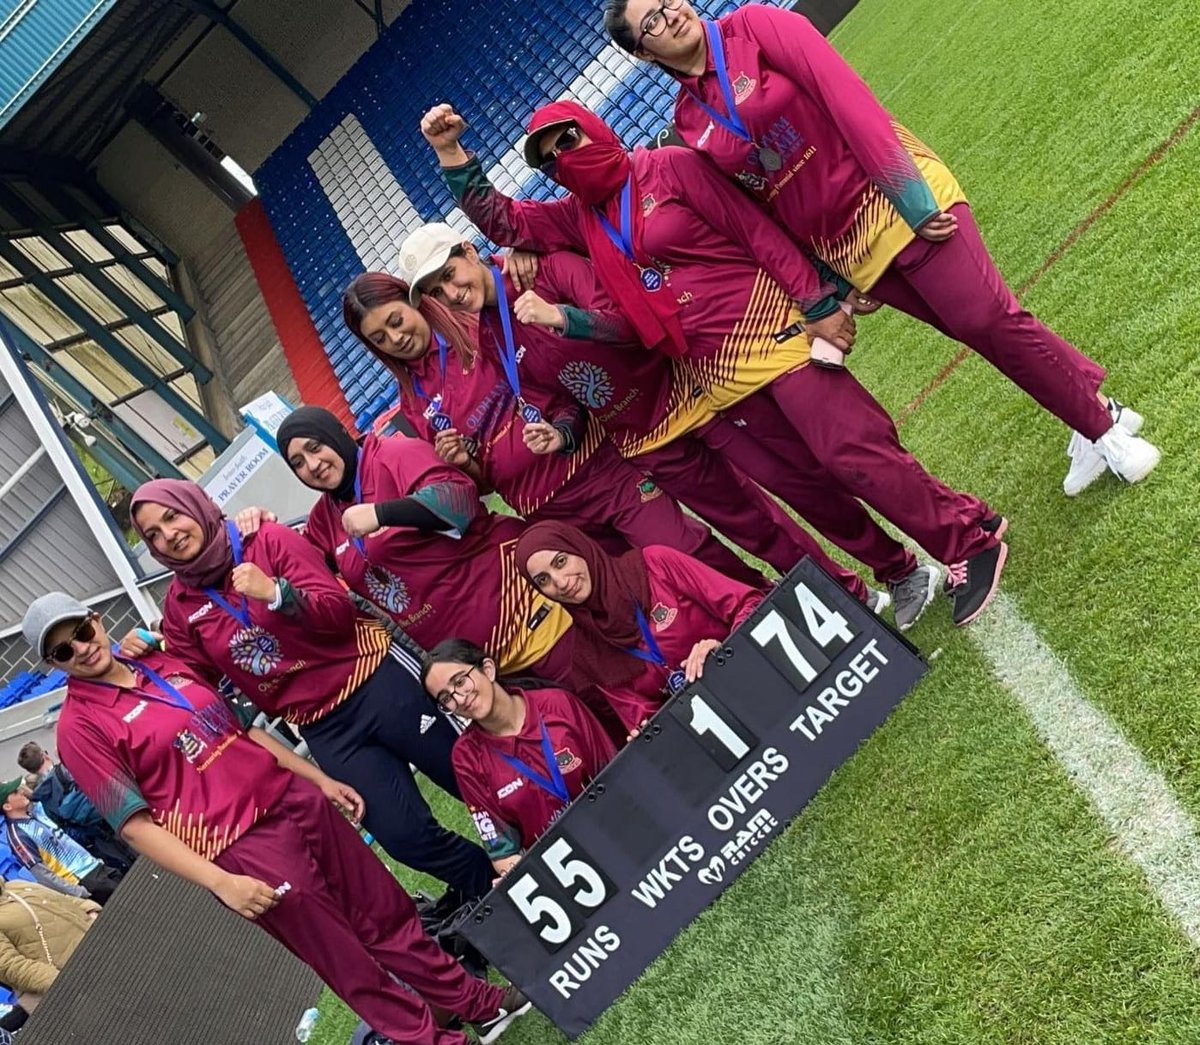 Our women's team were at @OfficialOAFC today for the cricket world cup event. They had a great time and managed to win their game #OldhamHour